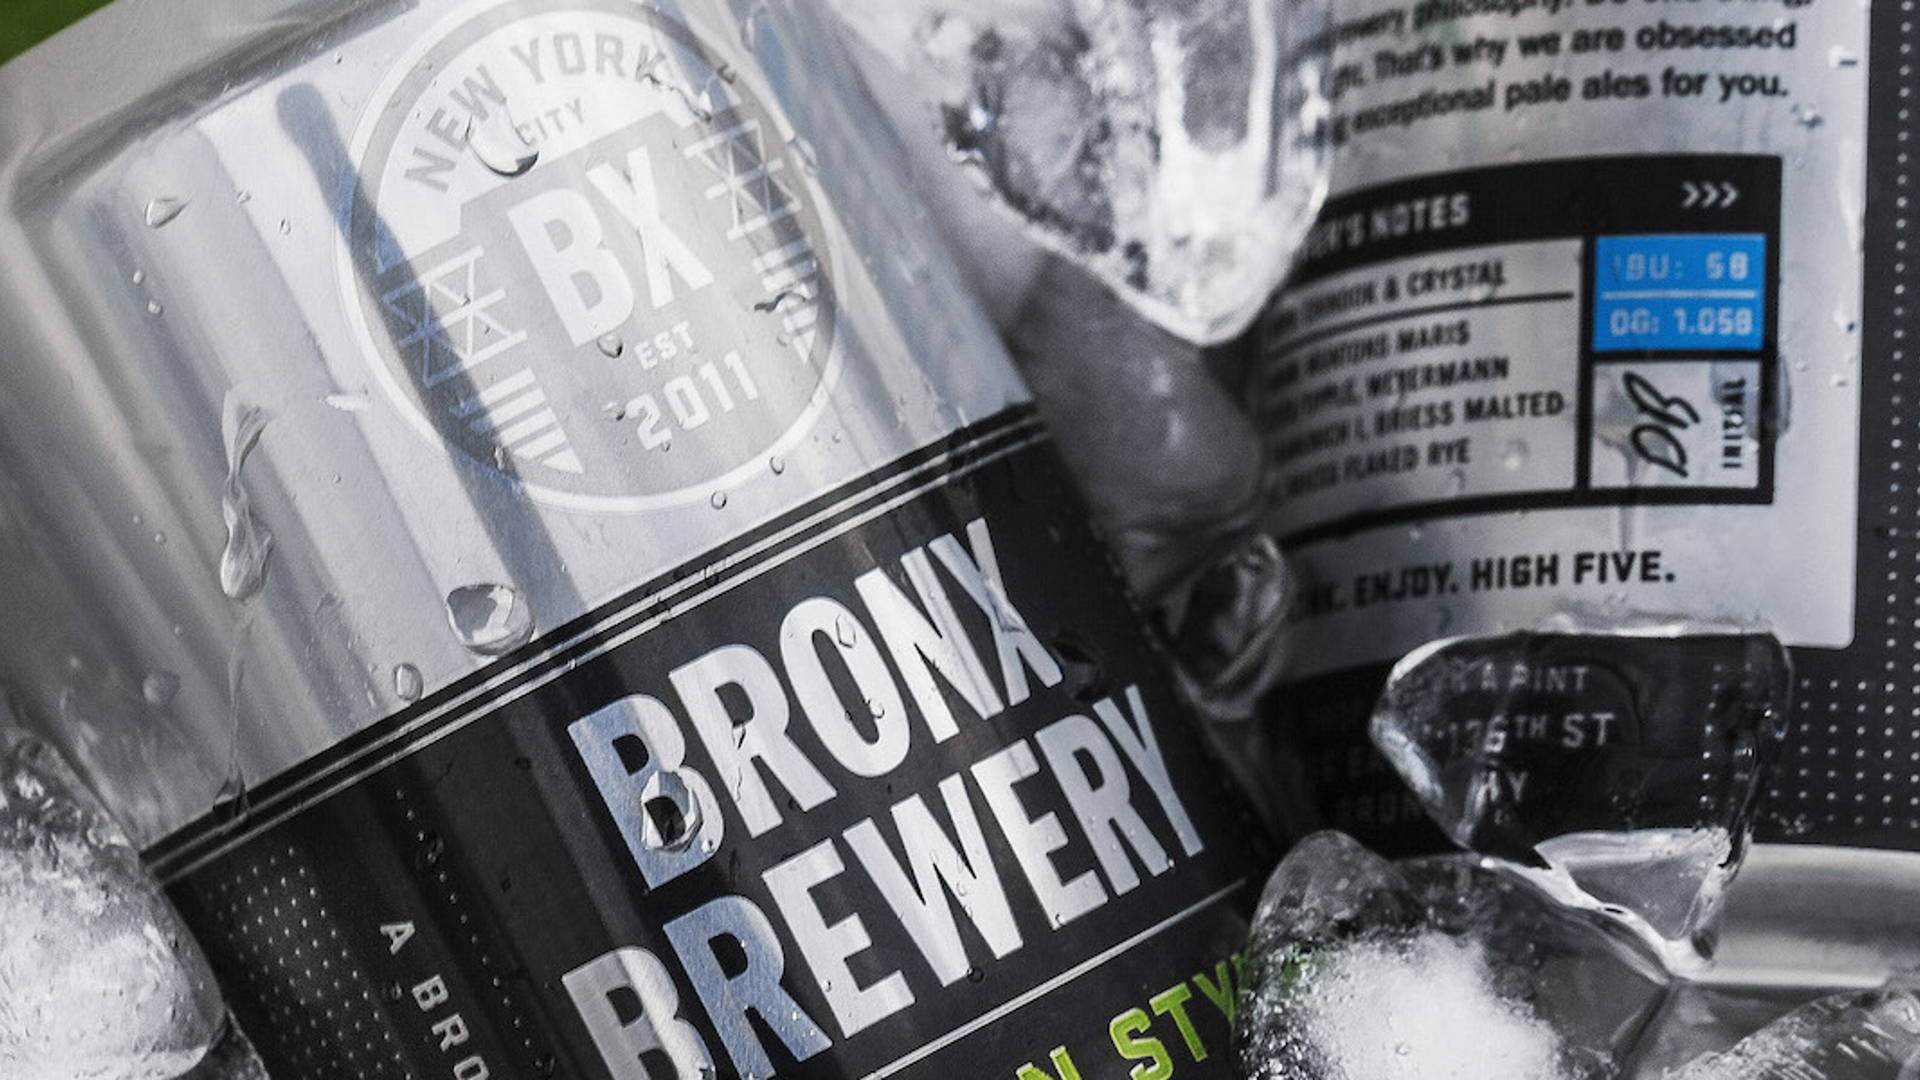 Featured image for Bronx Brewery